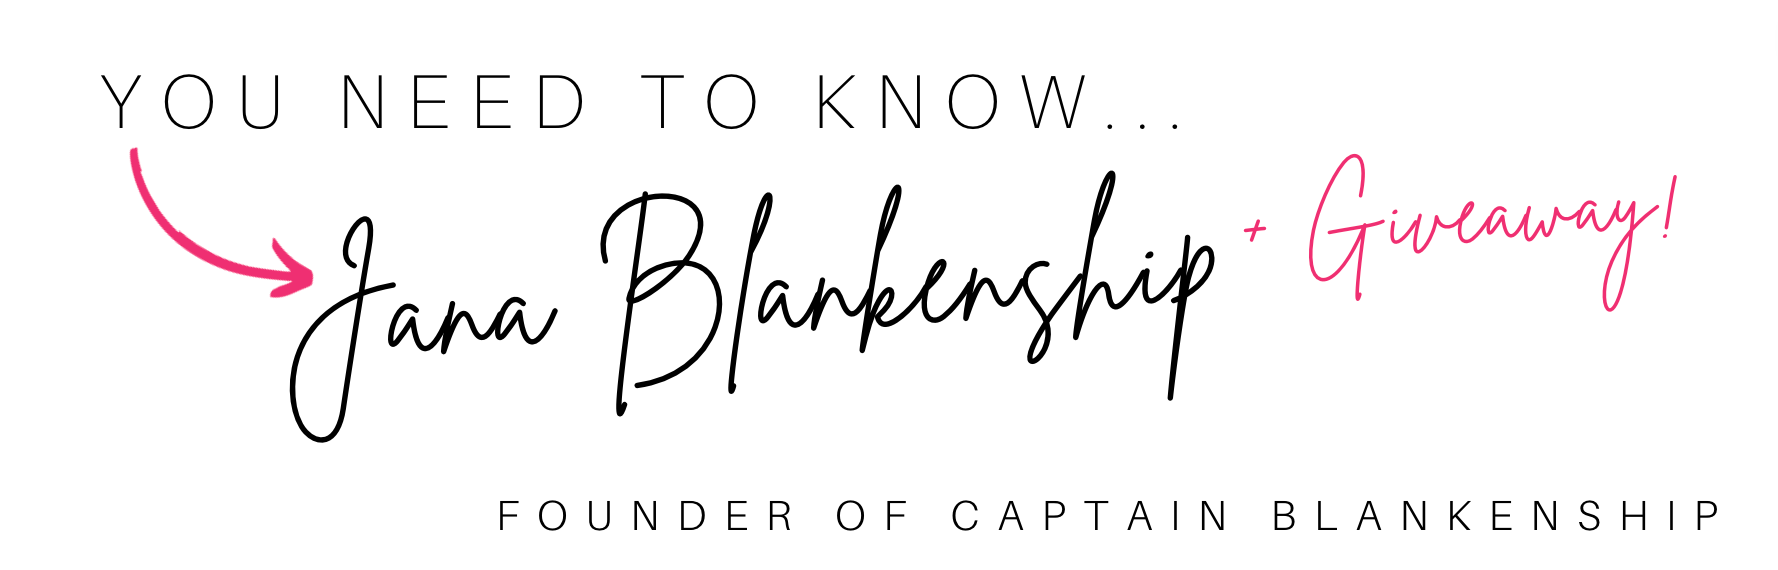 You NEED to kno Jana Blankenship - the founder of Captain Blankenship + A Giveaway!